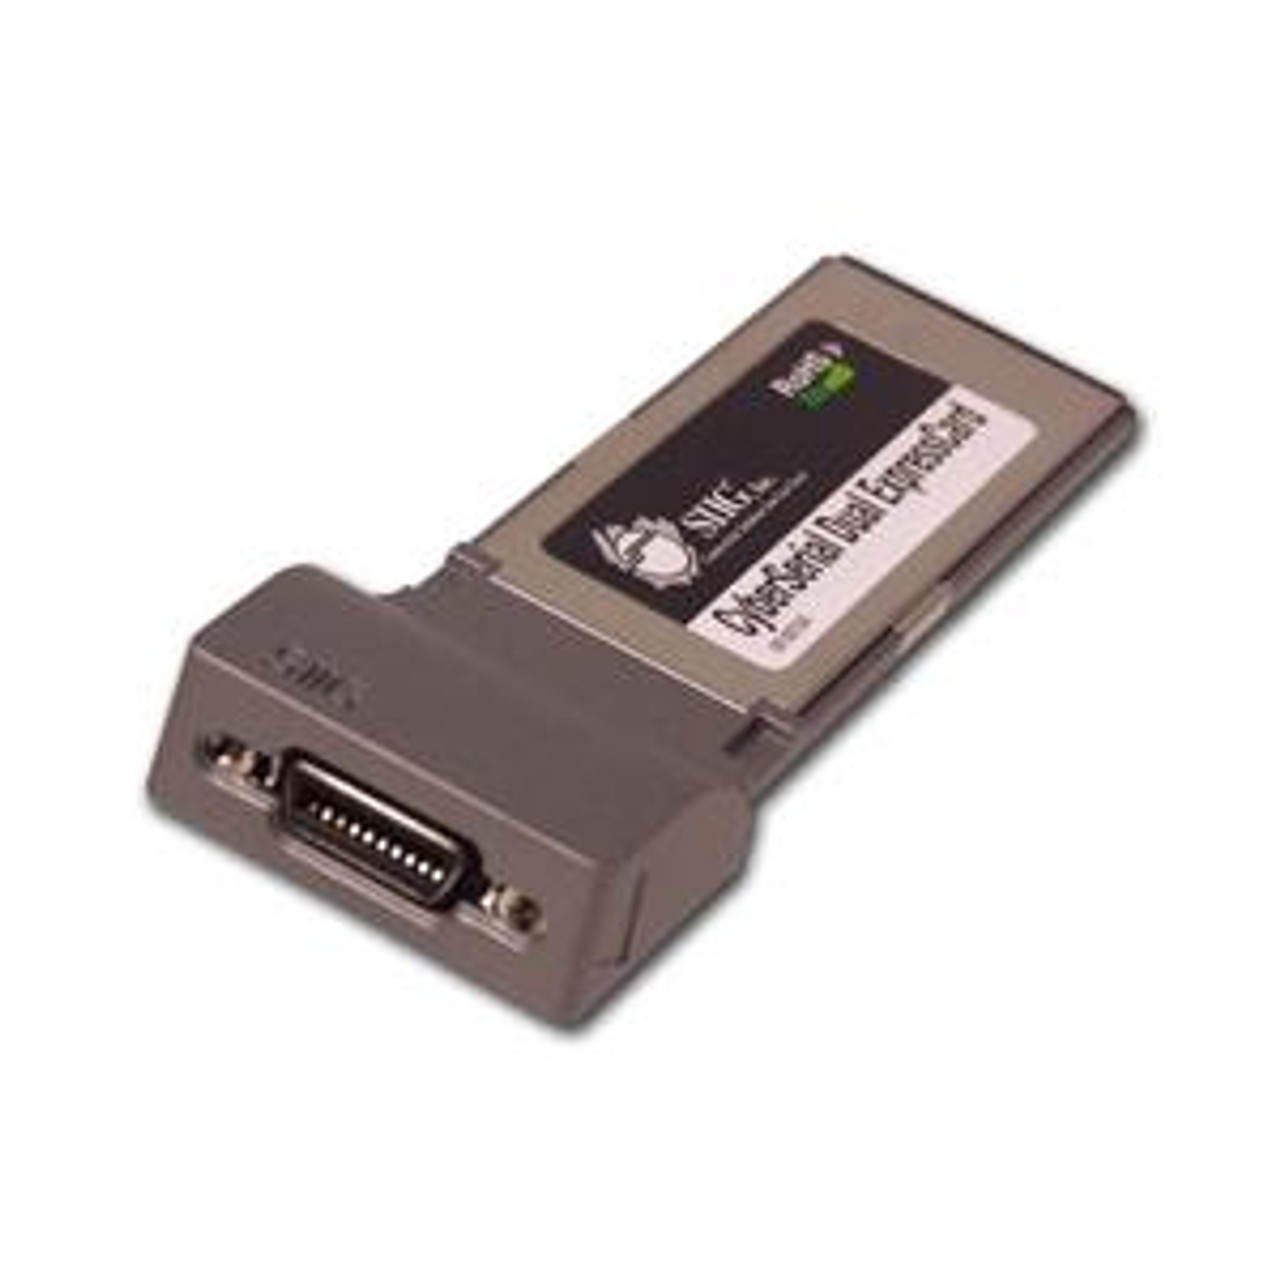 JJ-EC2011-S1 SIIG Cyberserial Dual Express (9-pin) Expresscard/34